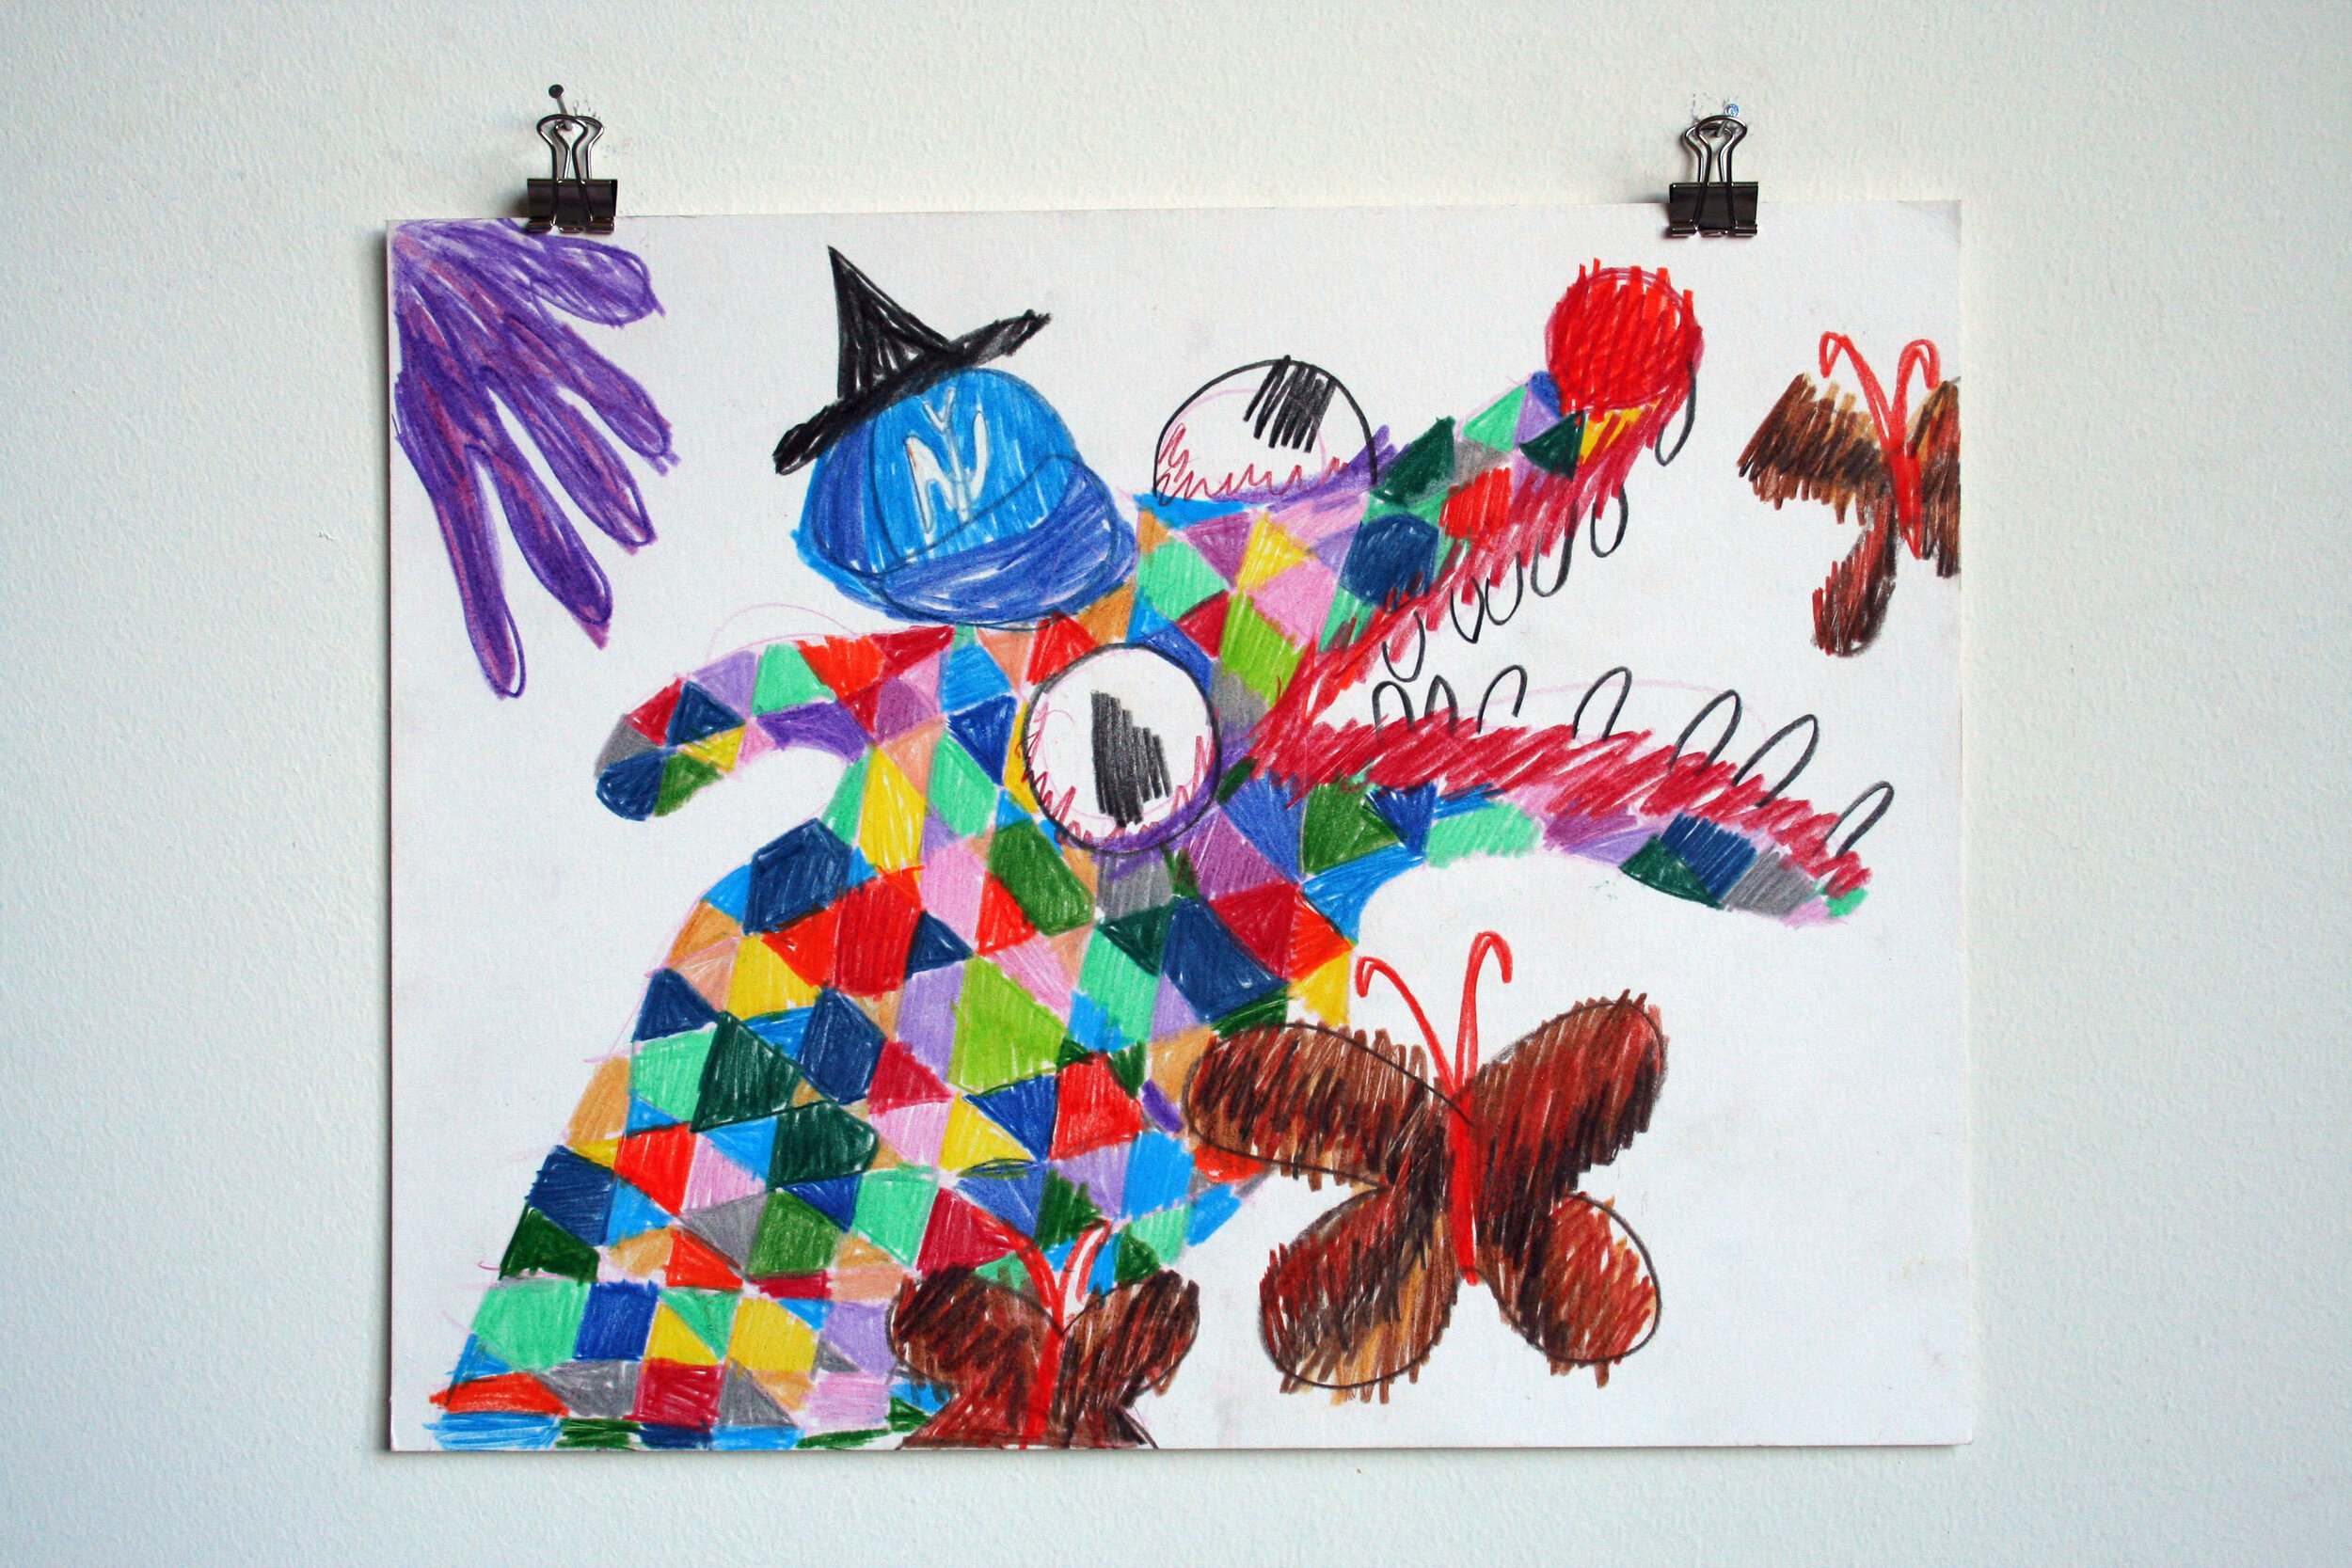   The Dolphin Jester Wore Two Hats , 2013  11 x 14 inches (27.94 x 35.56 cm.)  Colored pencil on paper 